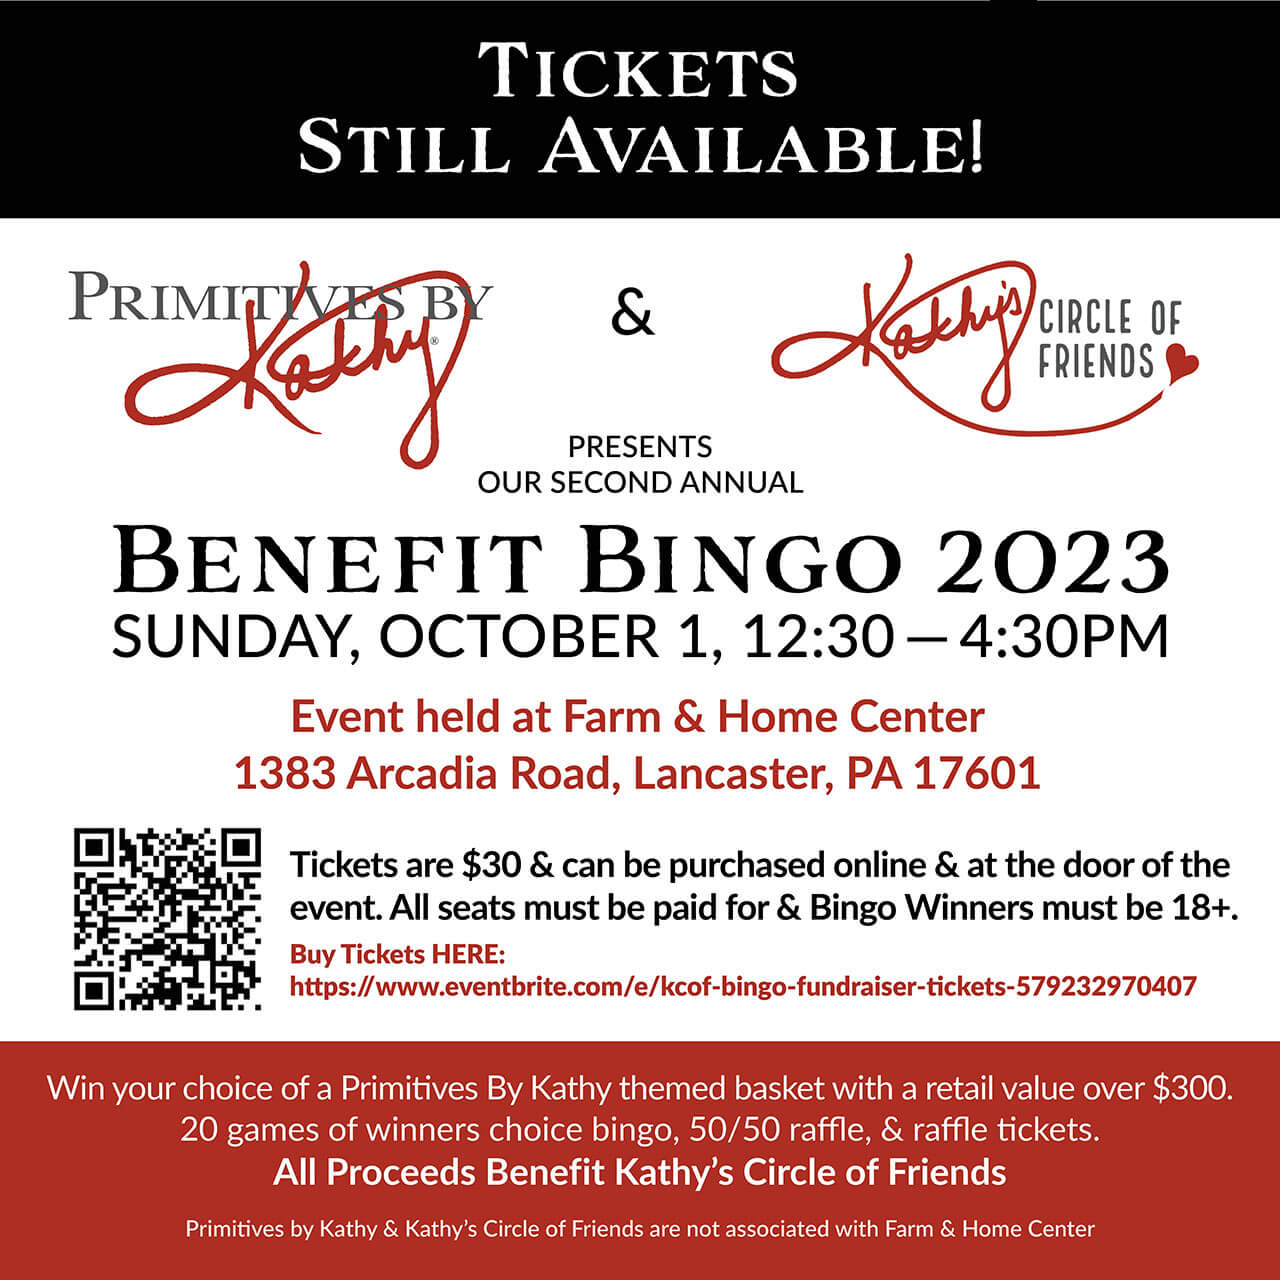 Primitives by Kathy and Kathy's Circle of Friends Presents Our Second Annual BENEFIT BINGO